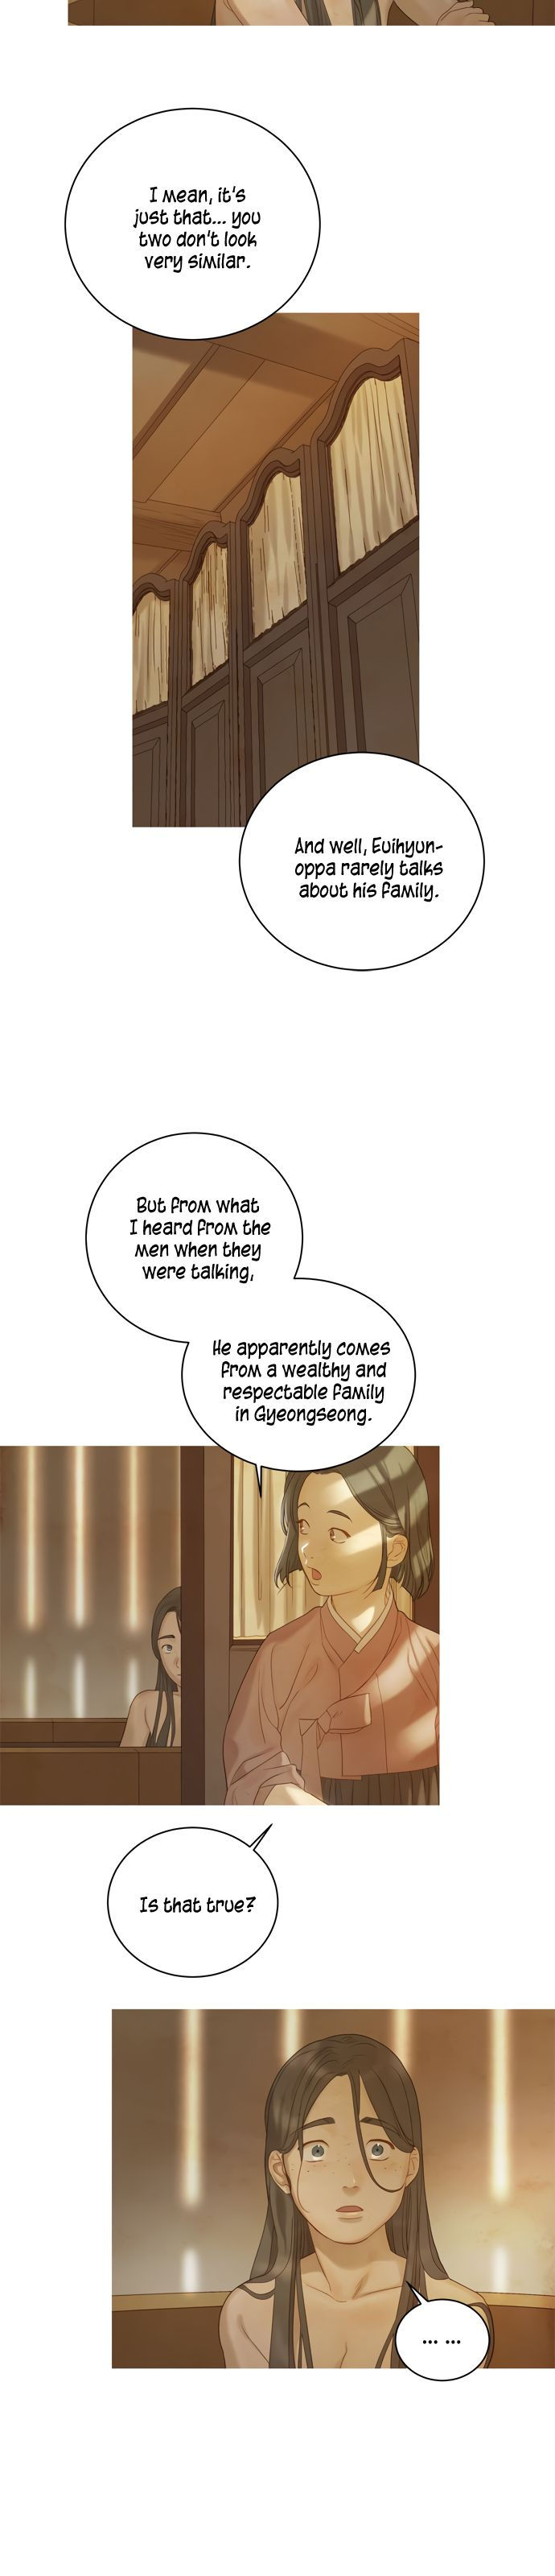 The Whale Star - The Gyeongseong Mermaid - Chapter 20 Page 10